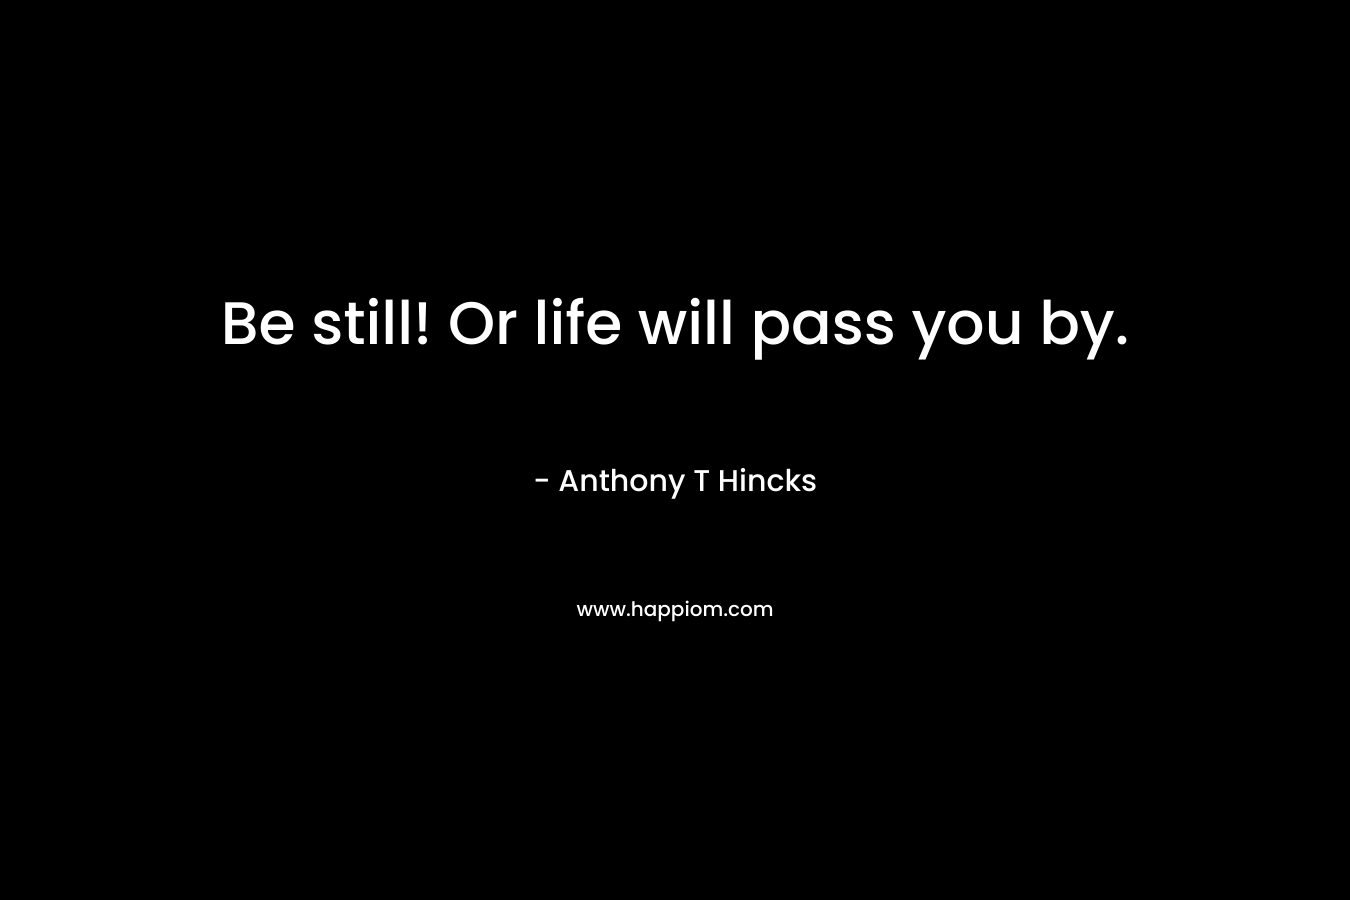 Be still! Or life will pass you by.